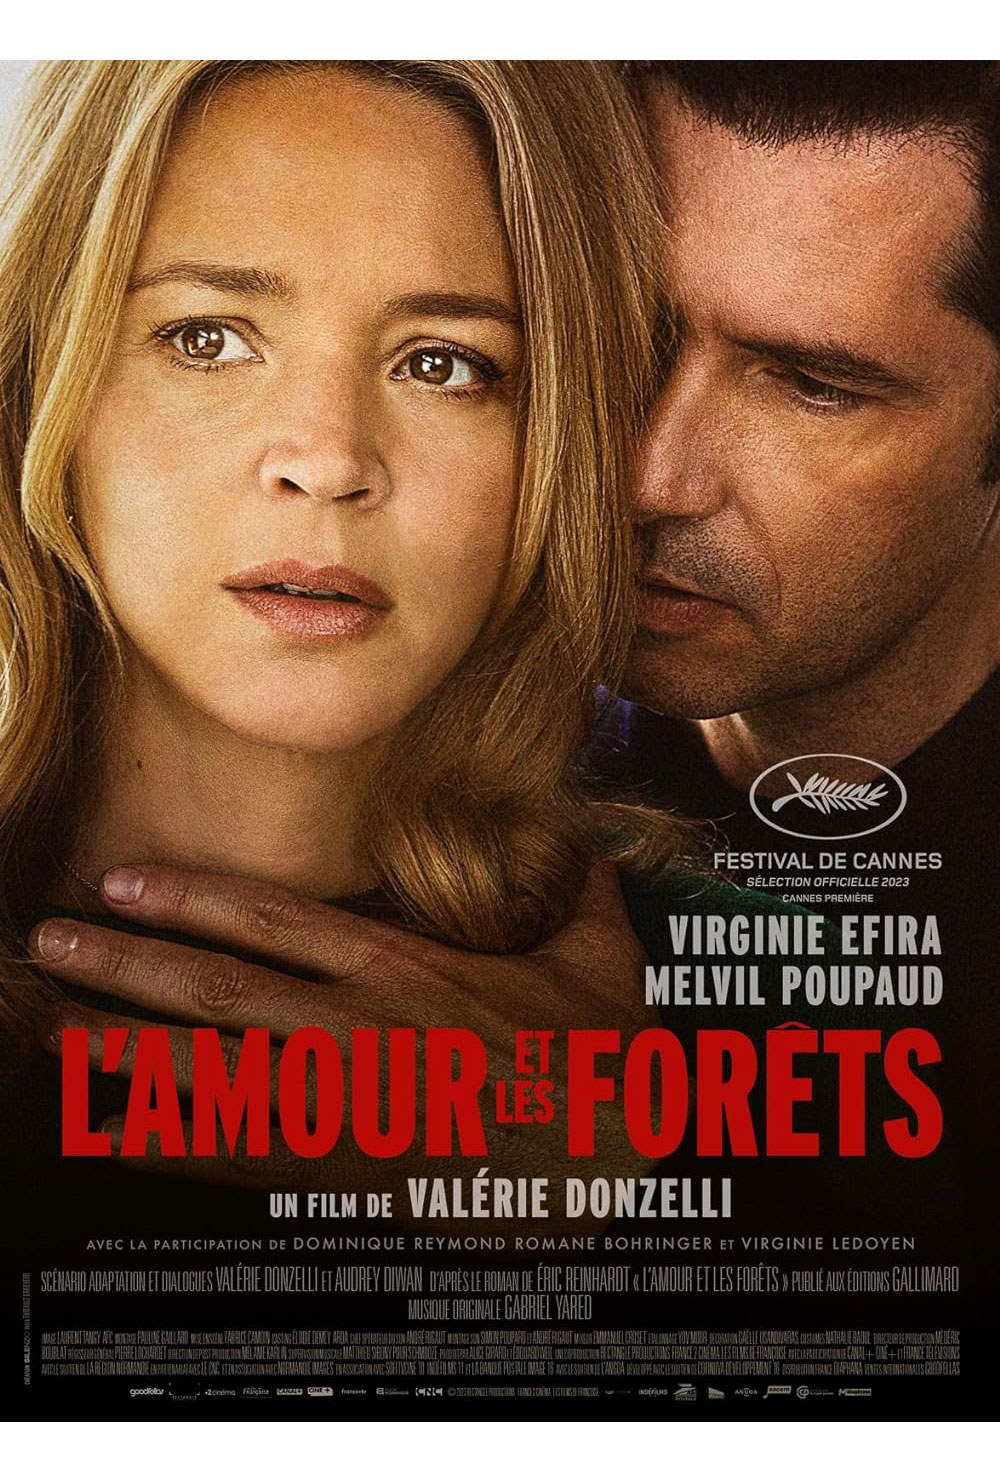 L’amour et les forets (Just the Two of Us) film poster